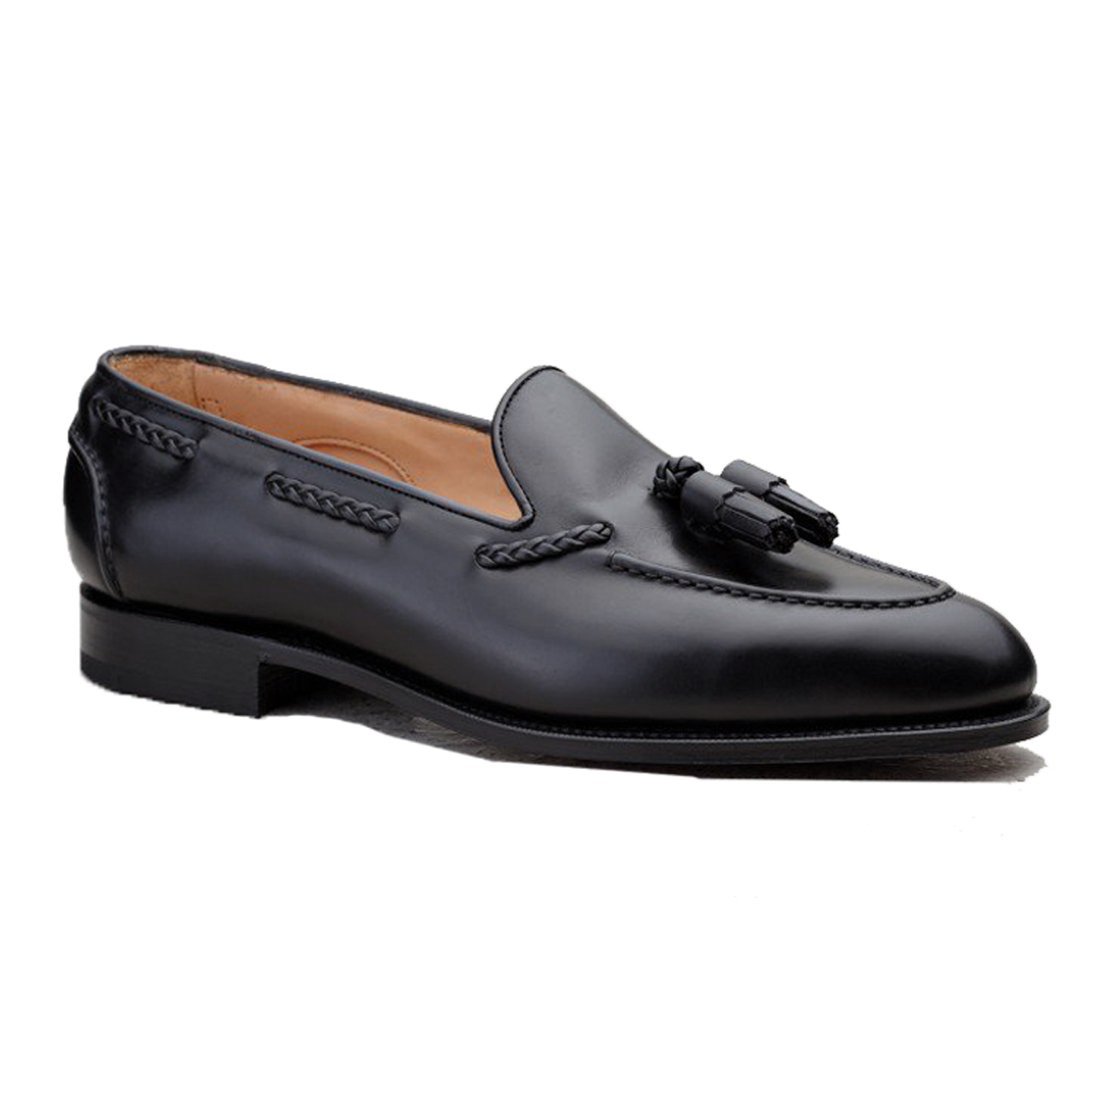 Luxurious Black Tassel Leather Loafers Shoe with Horse-bit Buckle 44/10